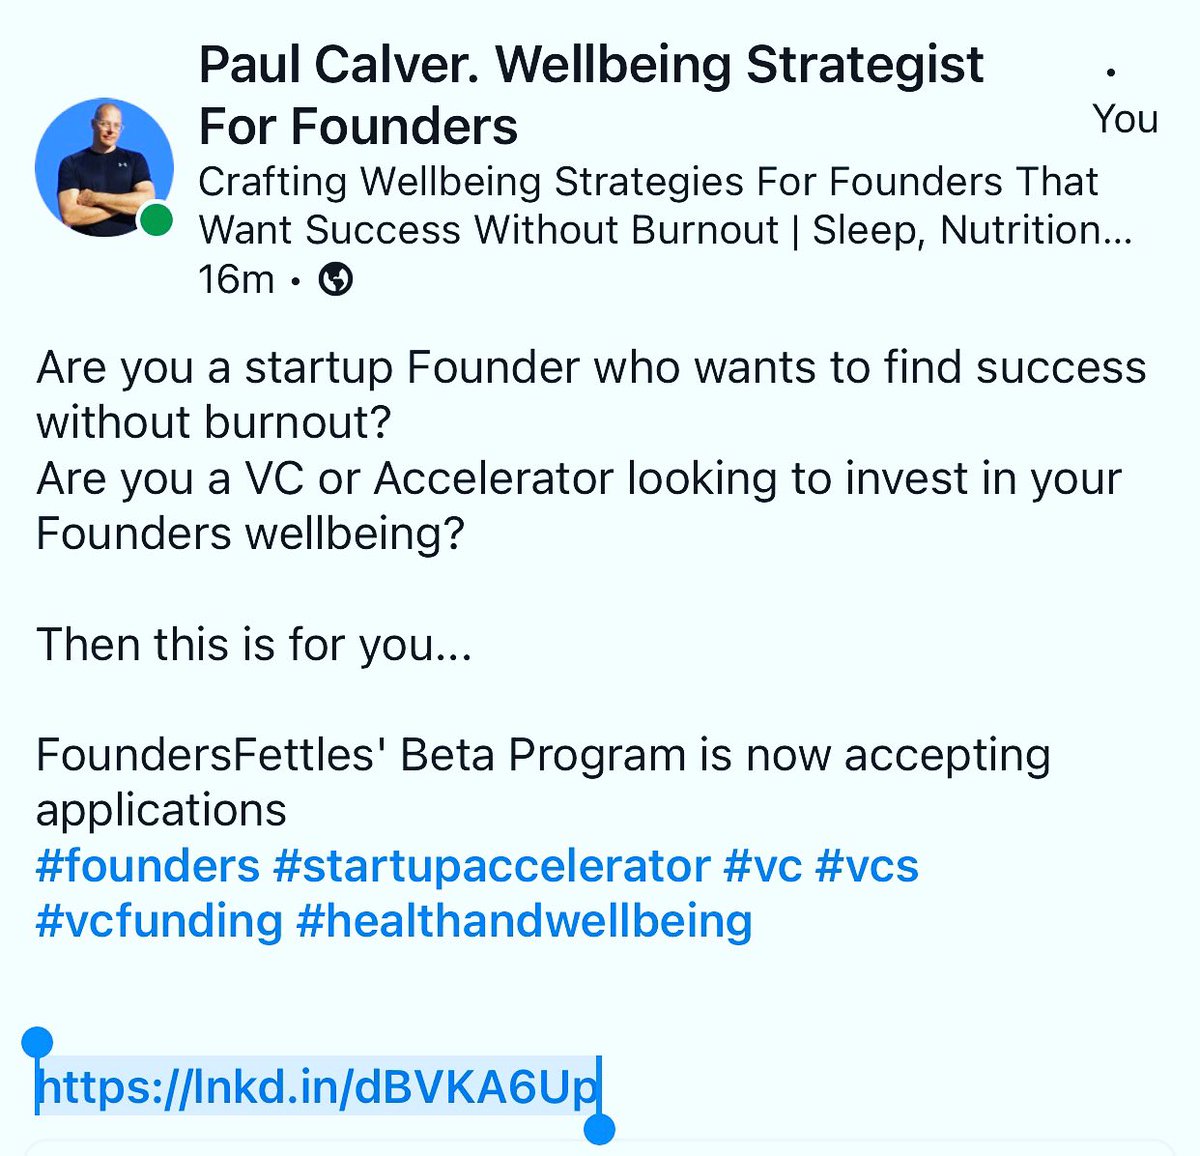 YOU: a startup Founder who wants to find success without burnout?
OR: a VC or Accelerator looking to invest in your Founders wellbeing?

Then this is for U...

#vc #founders #startup #startupaccelerator #founderswellbeing #foundersfettle #healthandwellness #successwithoutburnout